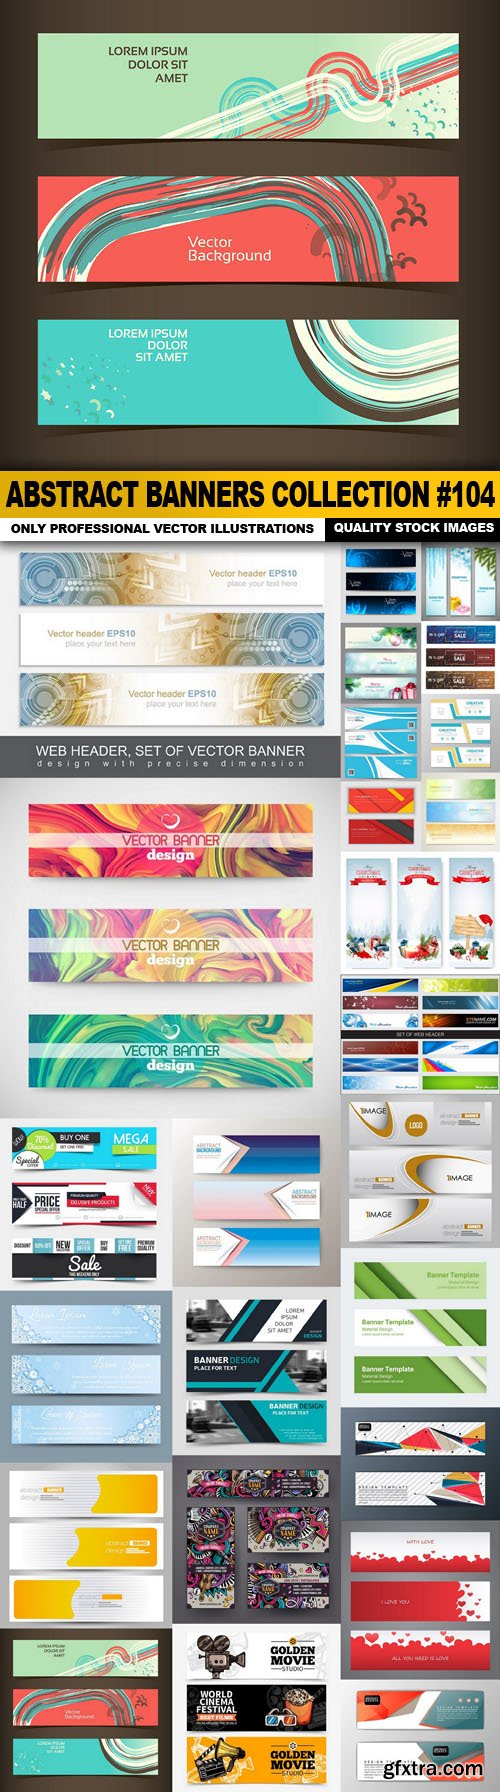 Abstract Banners Collection #104 - 25 Vectors